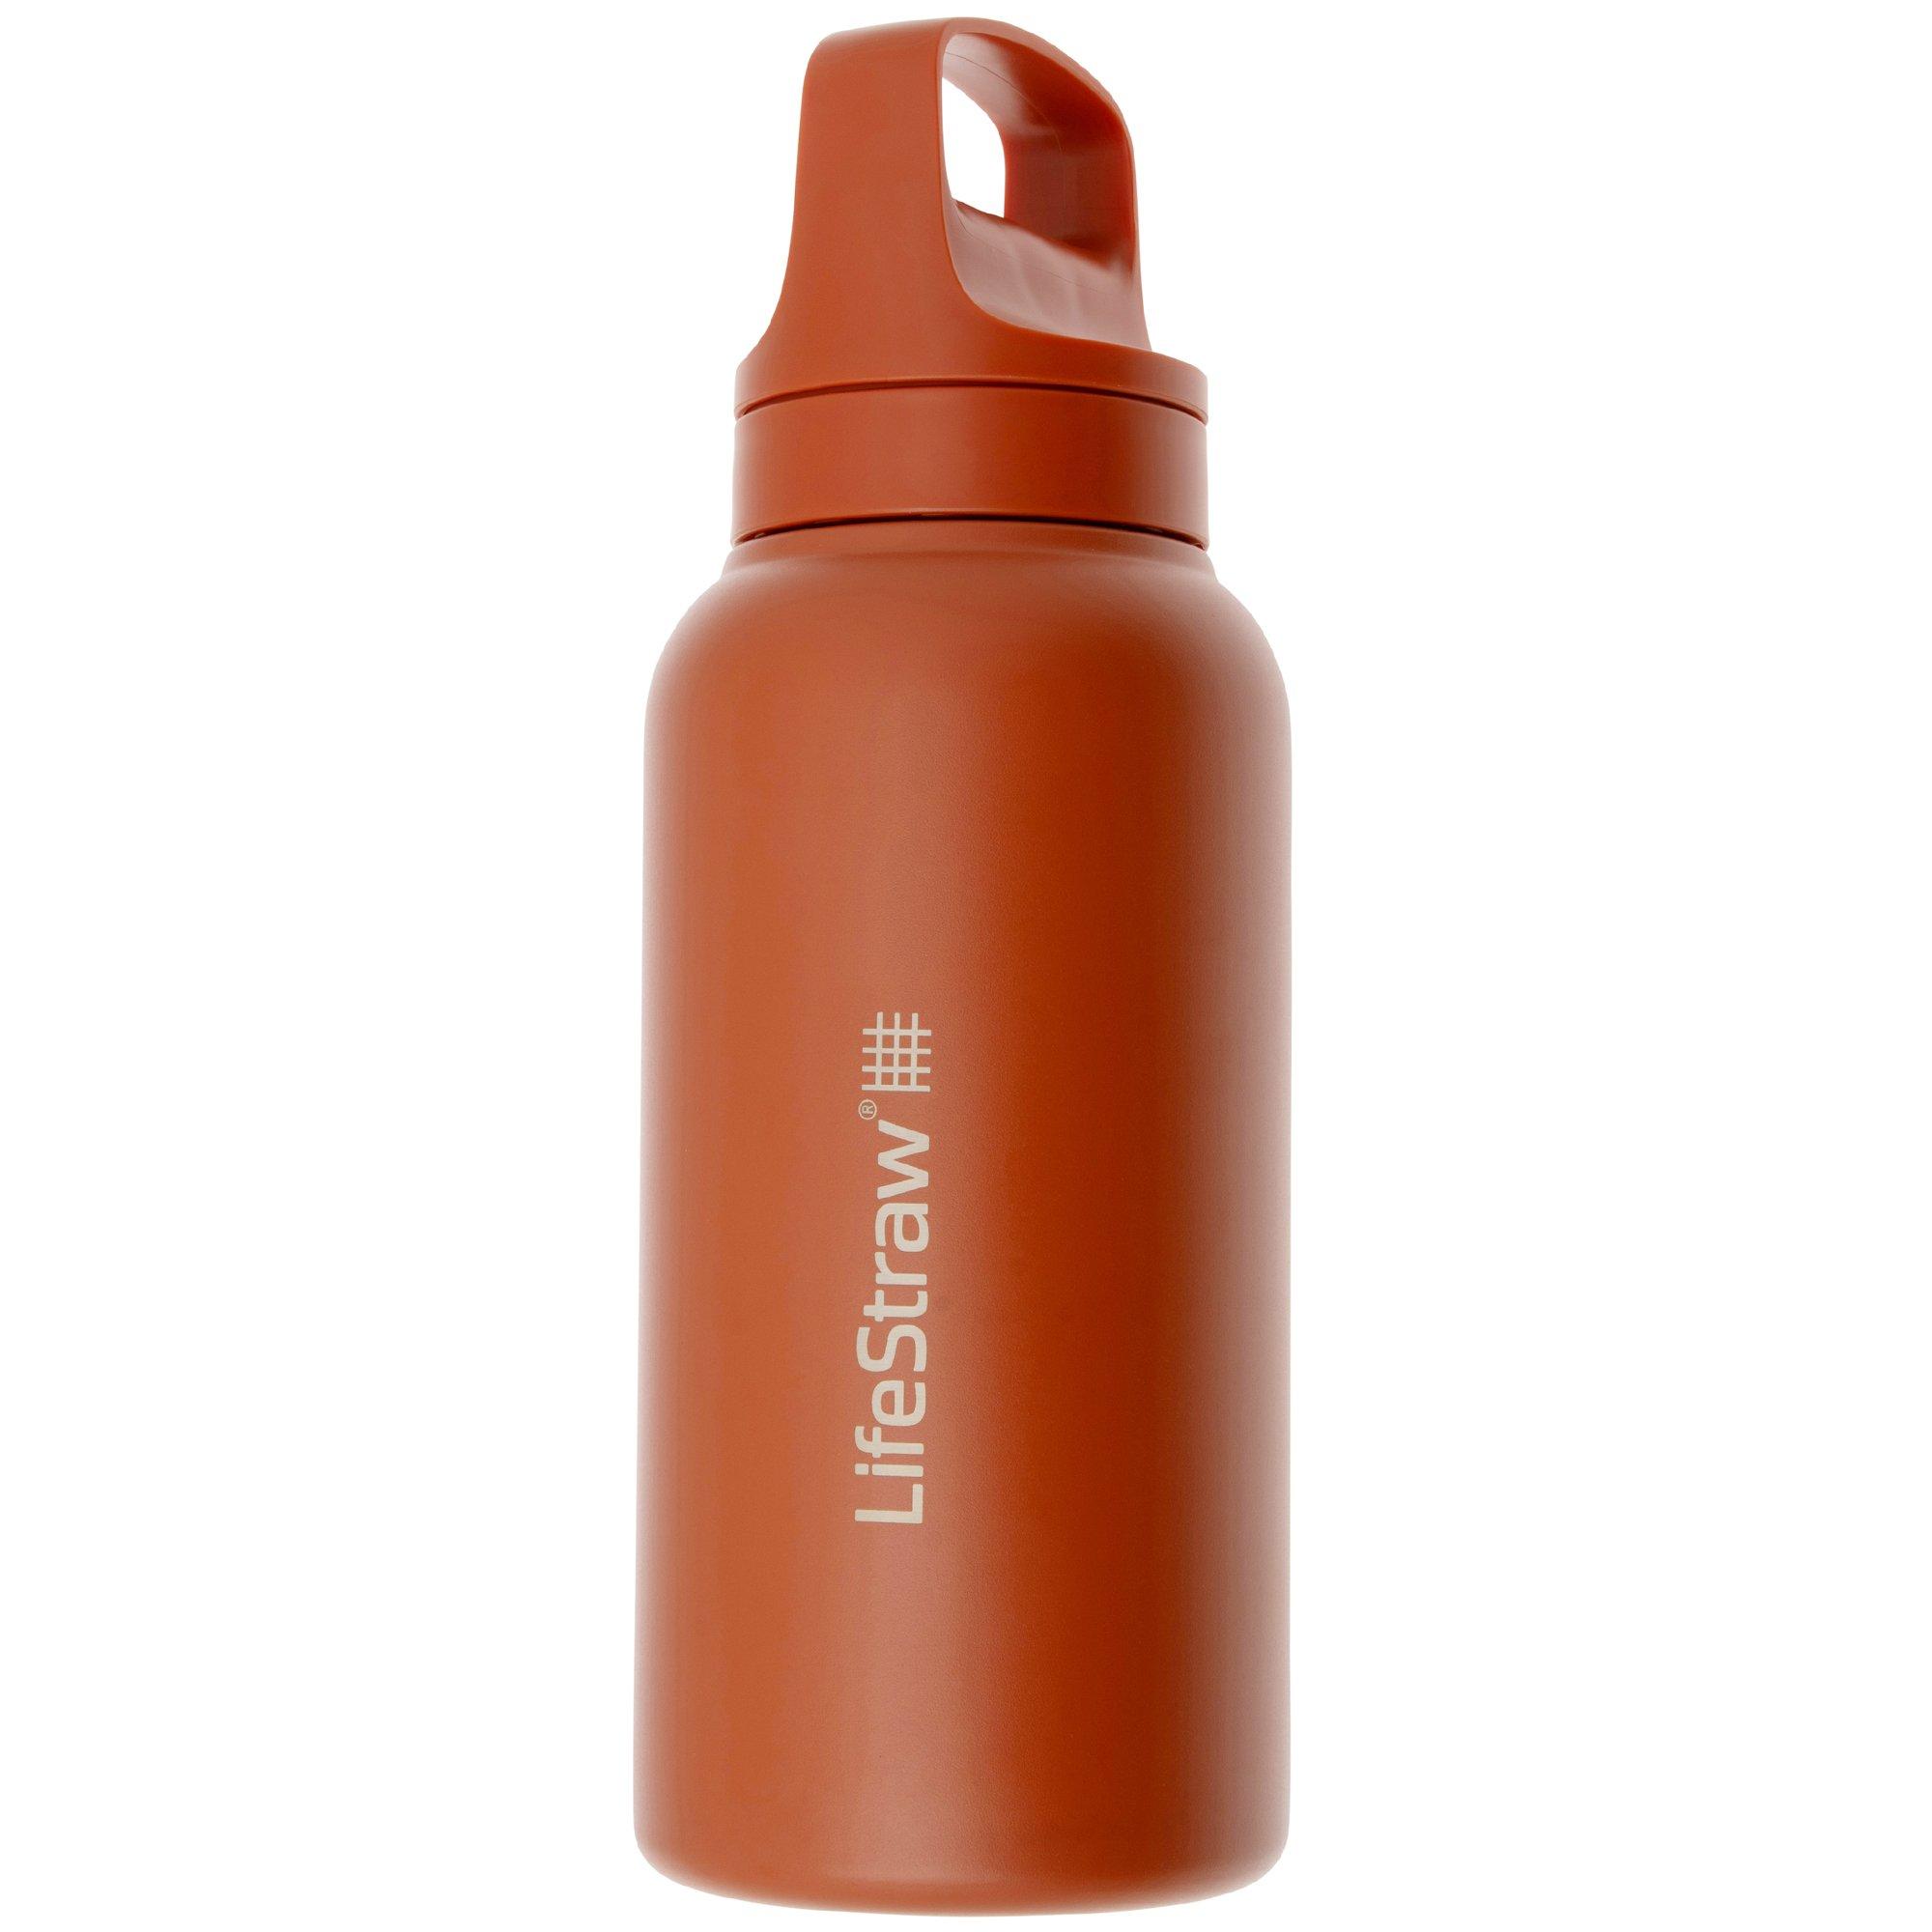 LifeStraw Go Kyoto Orange GOST-1L-ORG Stainless Steel, water bottle with 2-stage filter, 1L